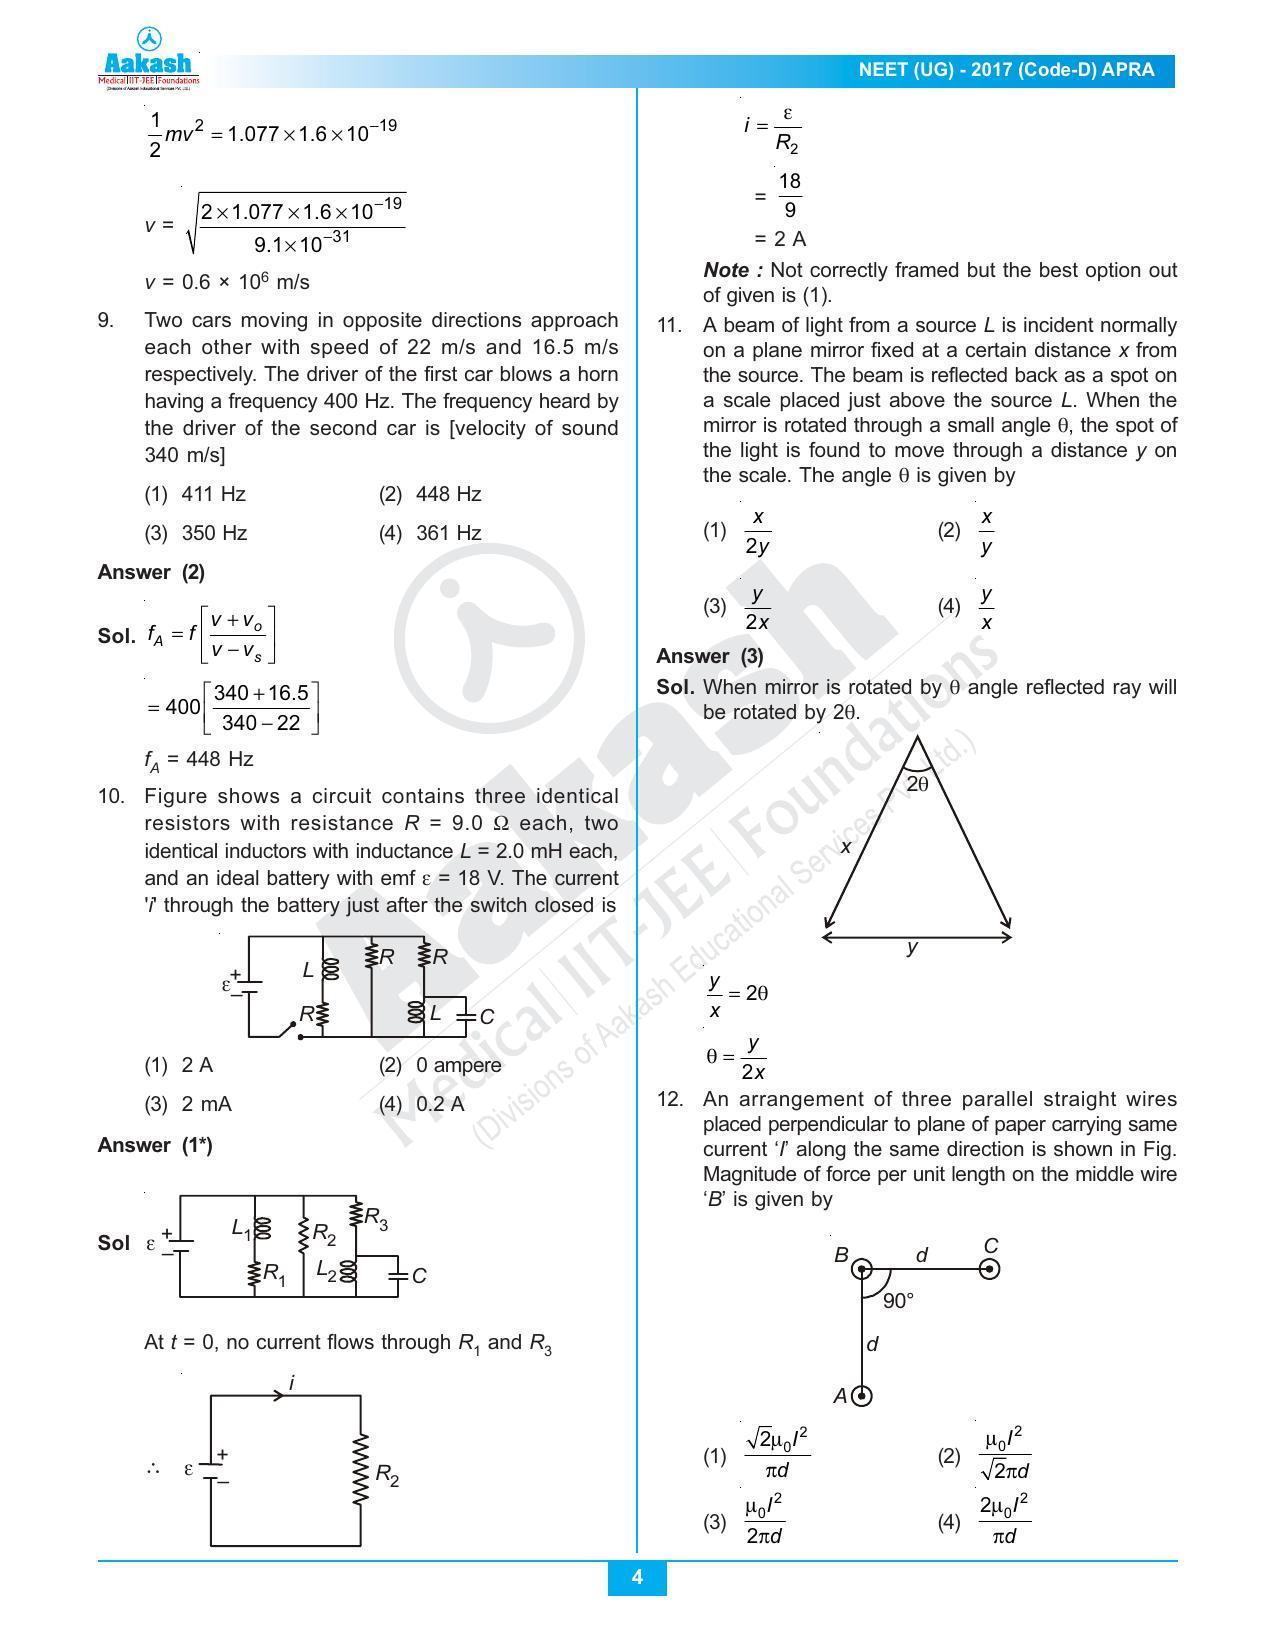  NEET Code D 2017 Answer & Solutions - Page 4